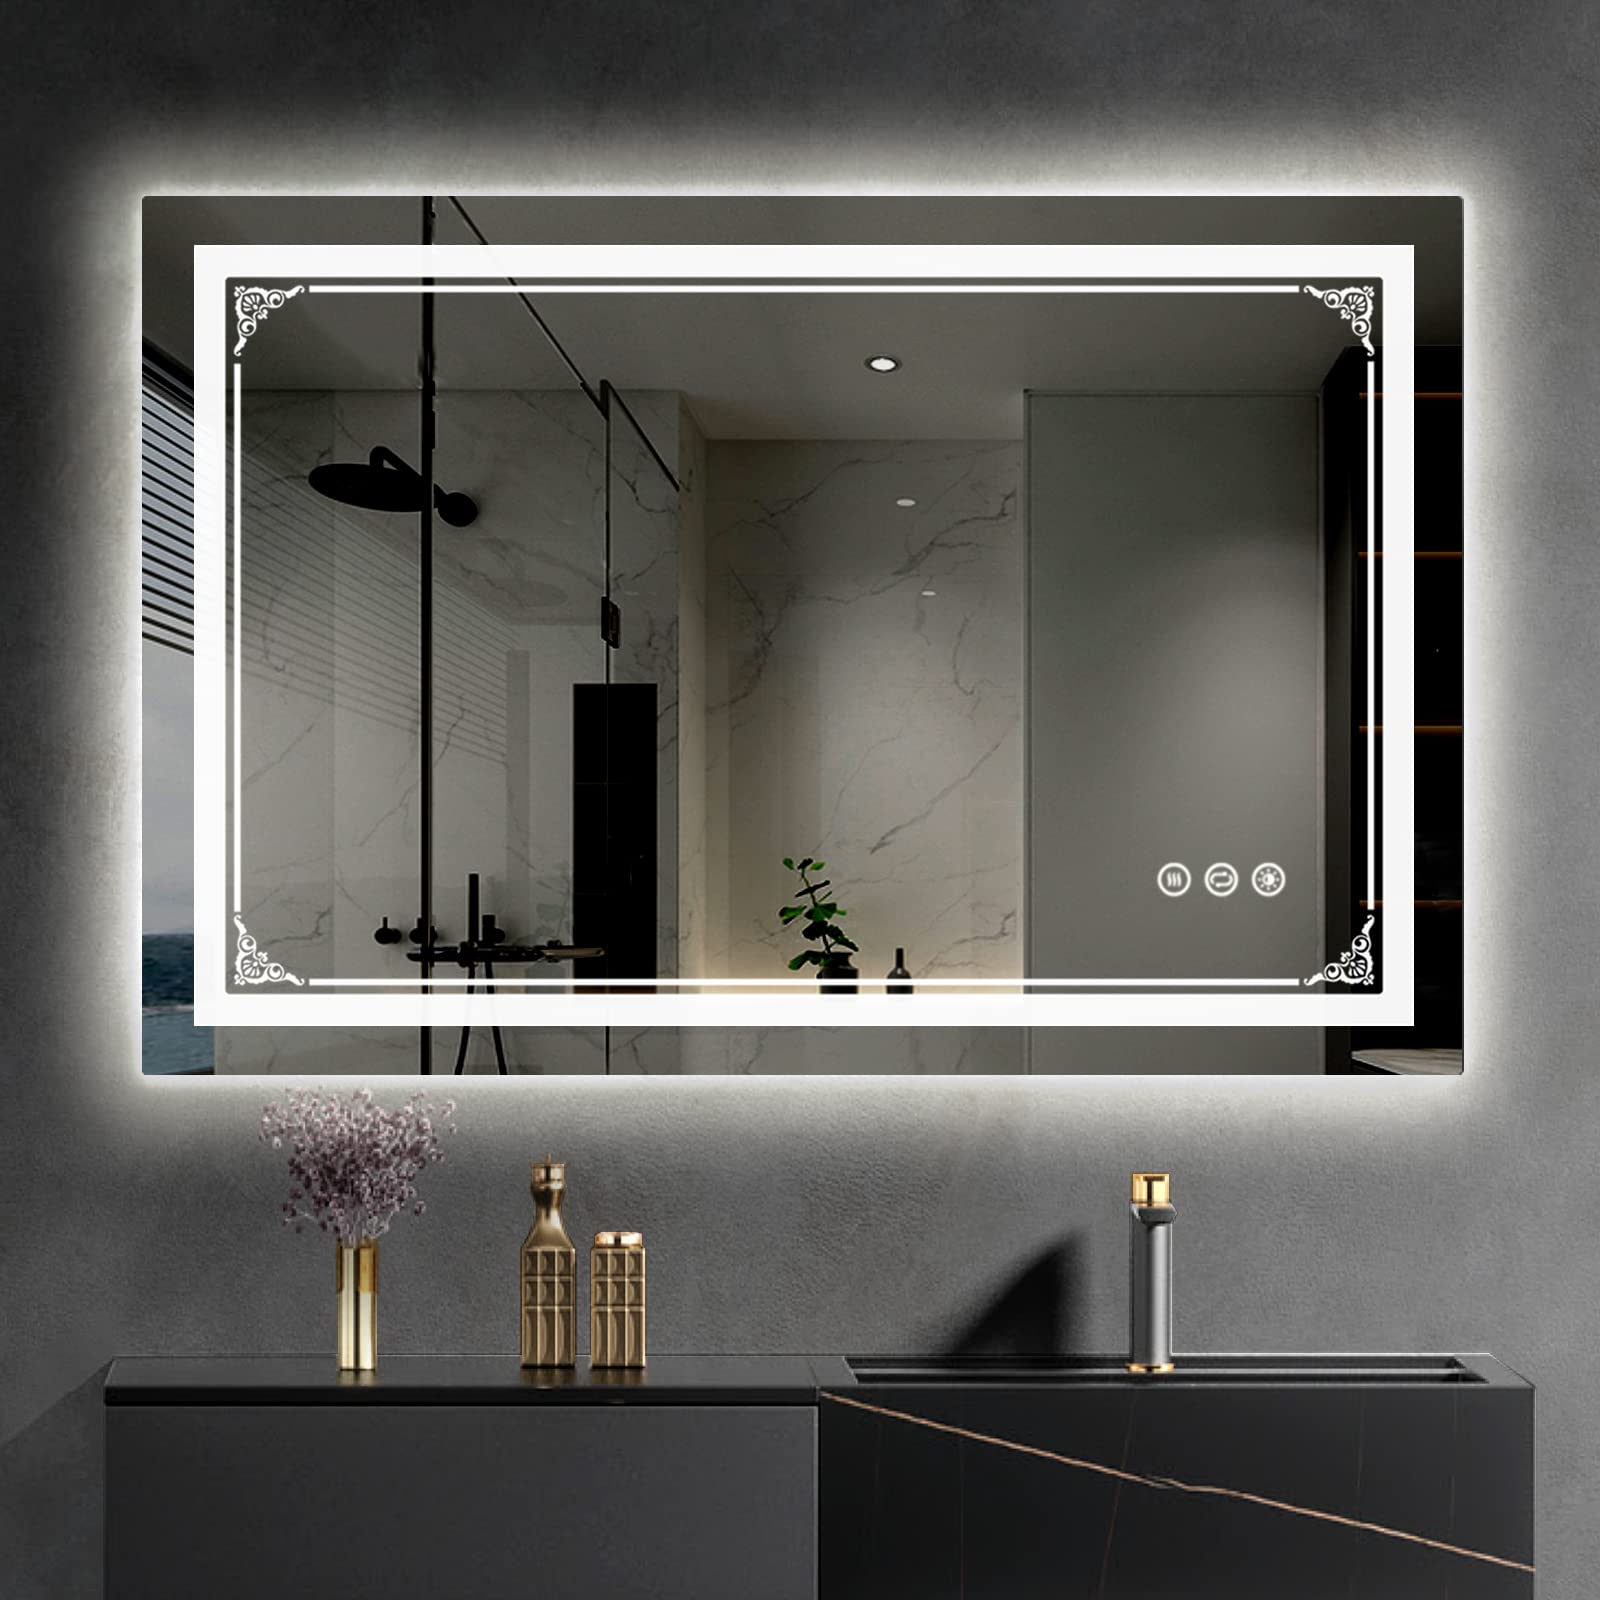 SUIMENNO Lighted Bathroom Mirror 24×32，Upgrade Your Bathroom Experience with Our Backlit and Front Lit Mirrors- Dimmable, 3 Color Lights, Anti-Fog, and Memory Feature, Horizontal/Vertical